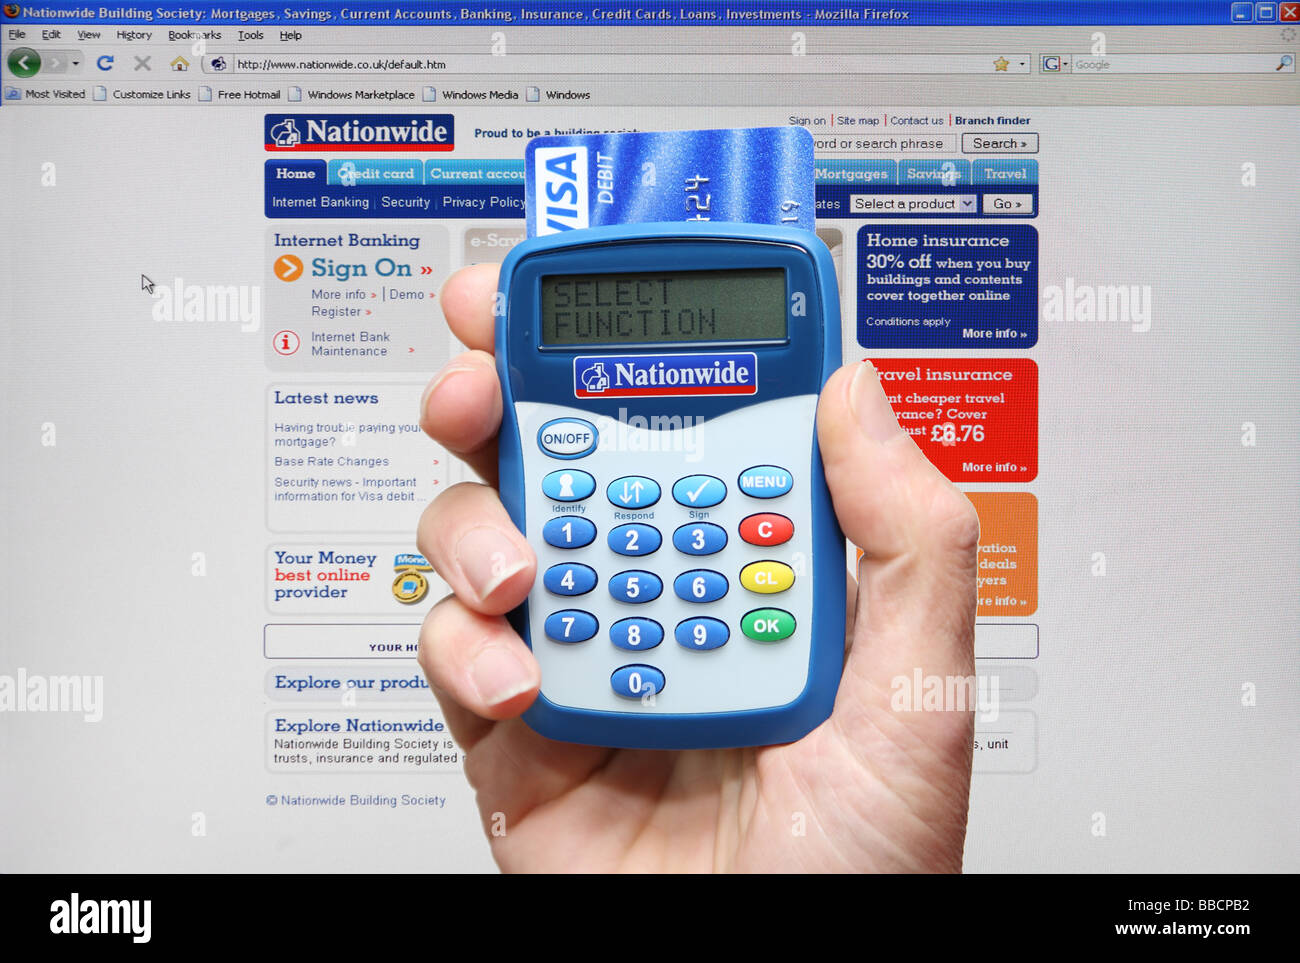 Nationwide building society chip and pin card reader held in hand, UK Stock Photo